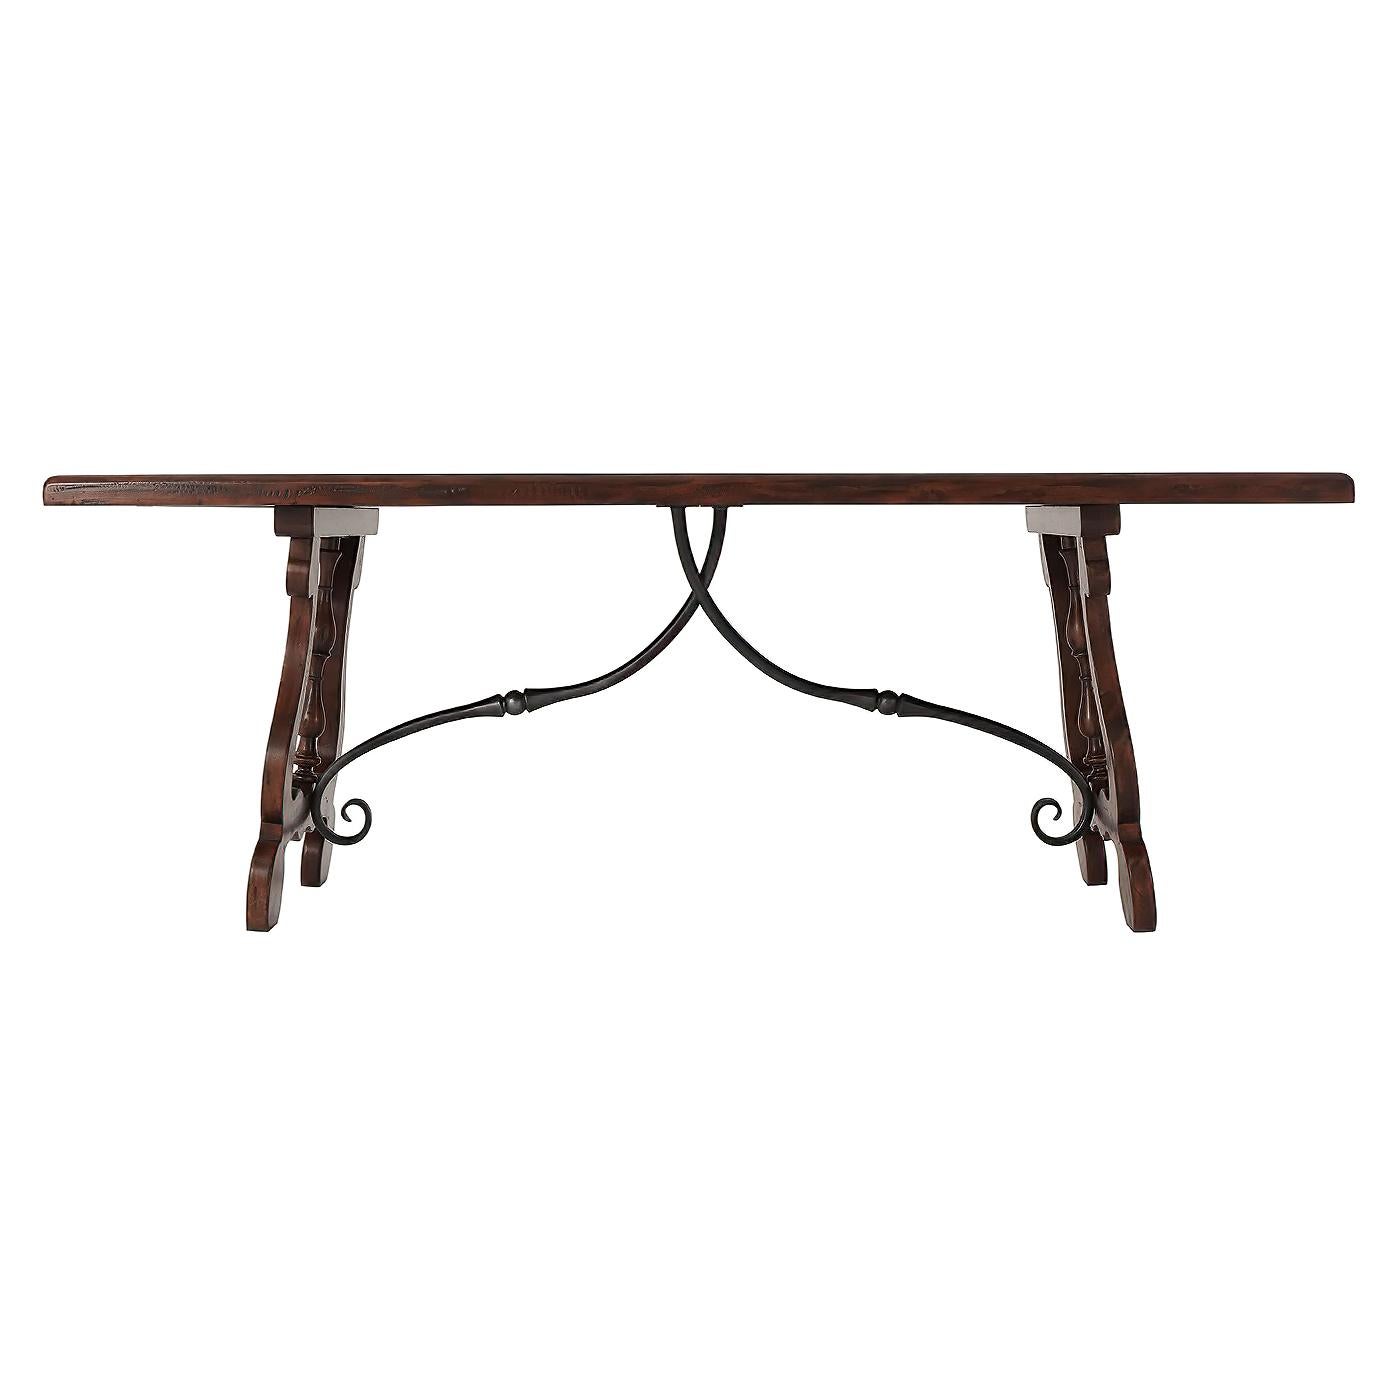 A 17th century Italian style antiqued wood refectory dining table or kitchen table, the top with stellar parquetry above splayed lyre ends joined by wrought iron stretchers.
Dimensions: 82